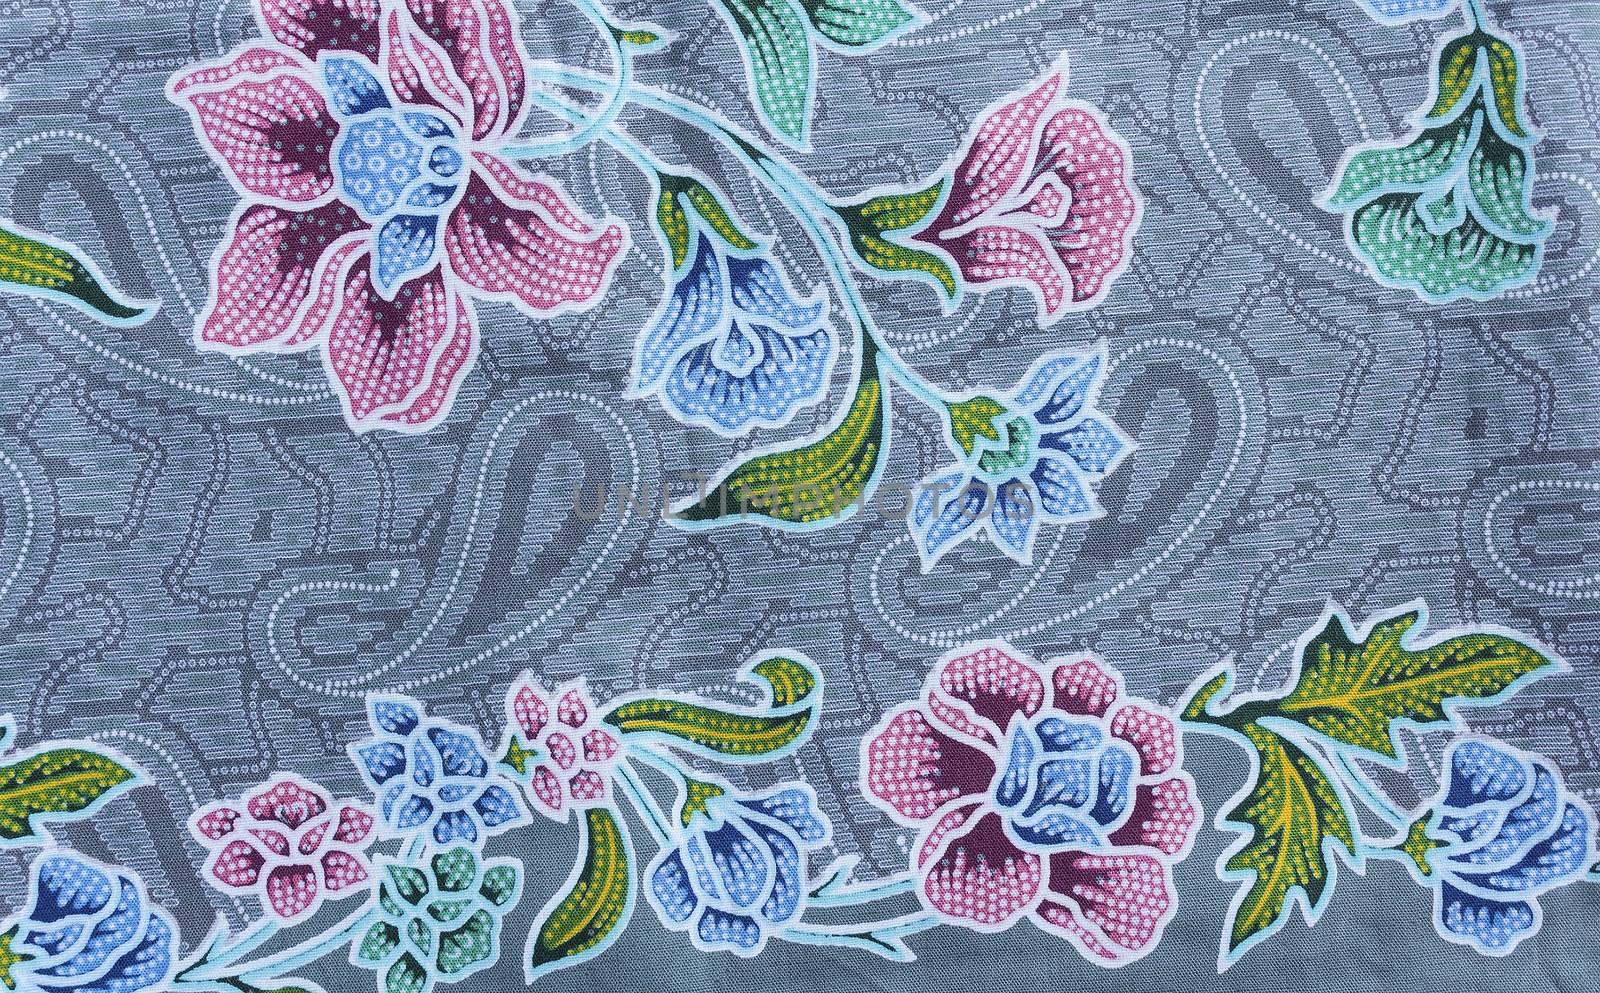 Texture of thai fabric by olovedog